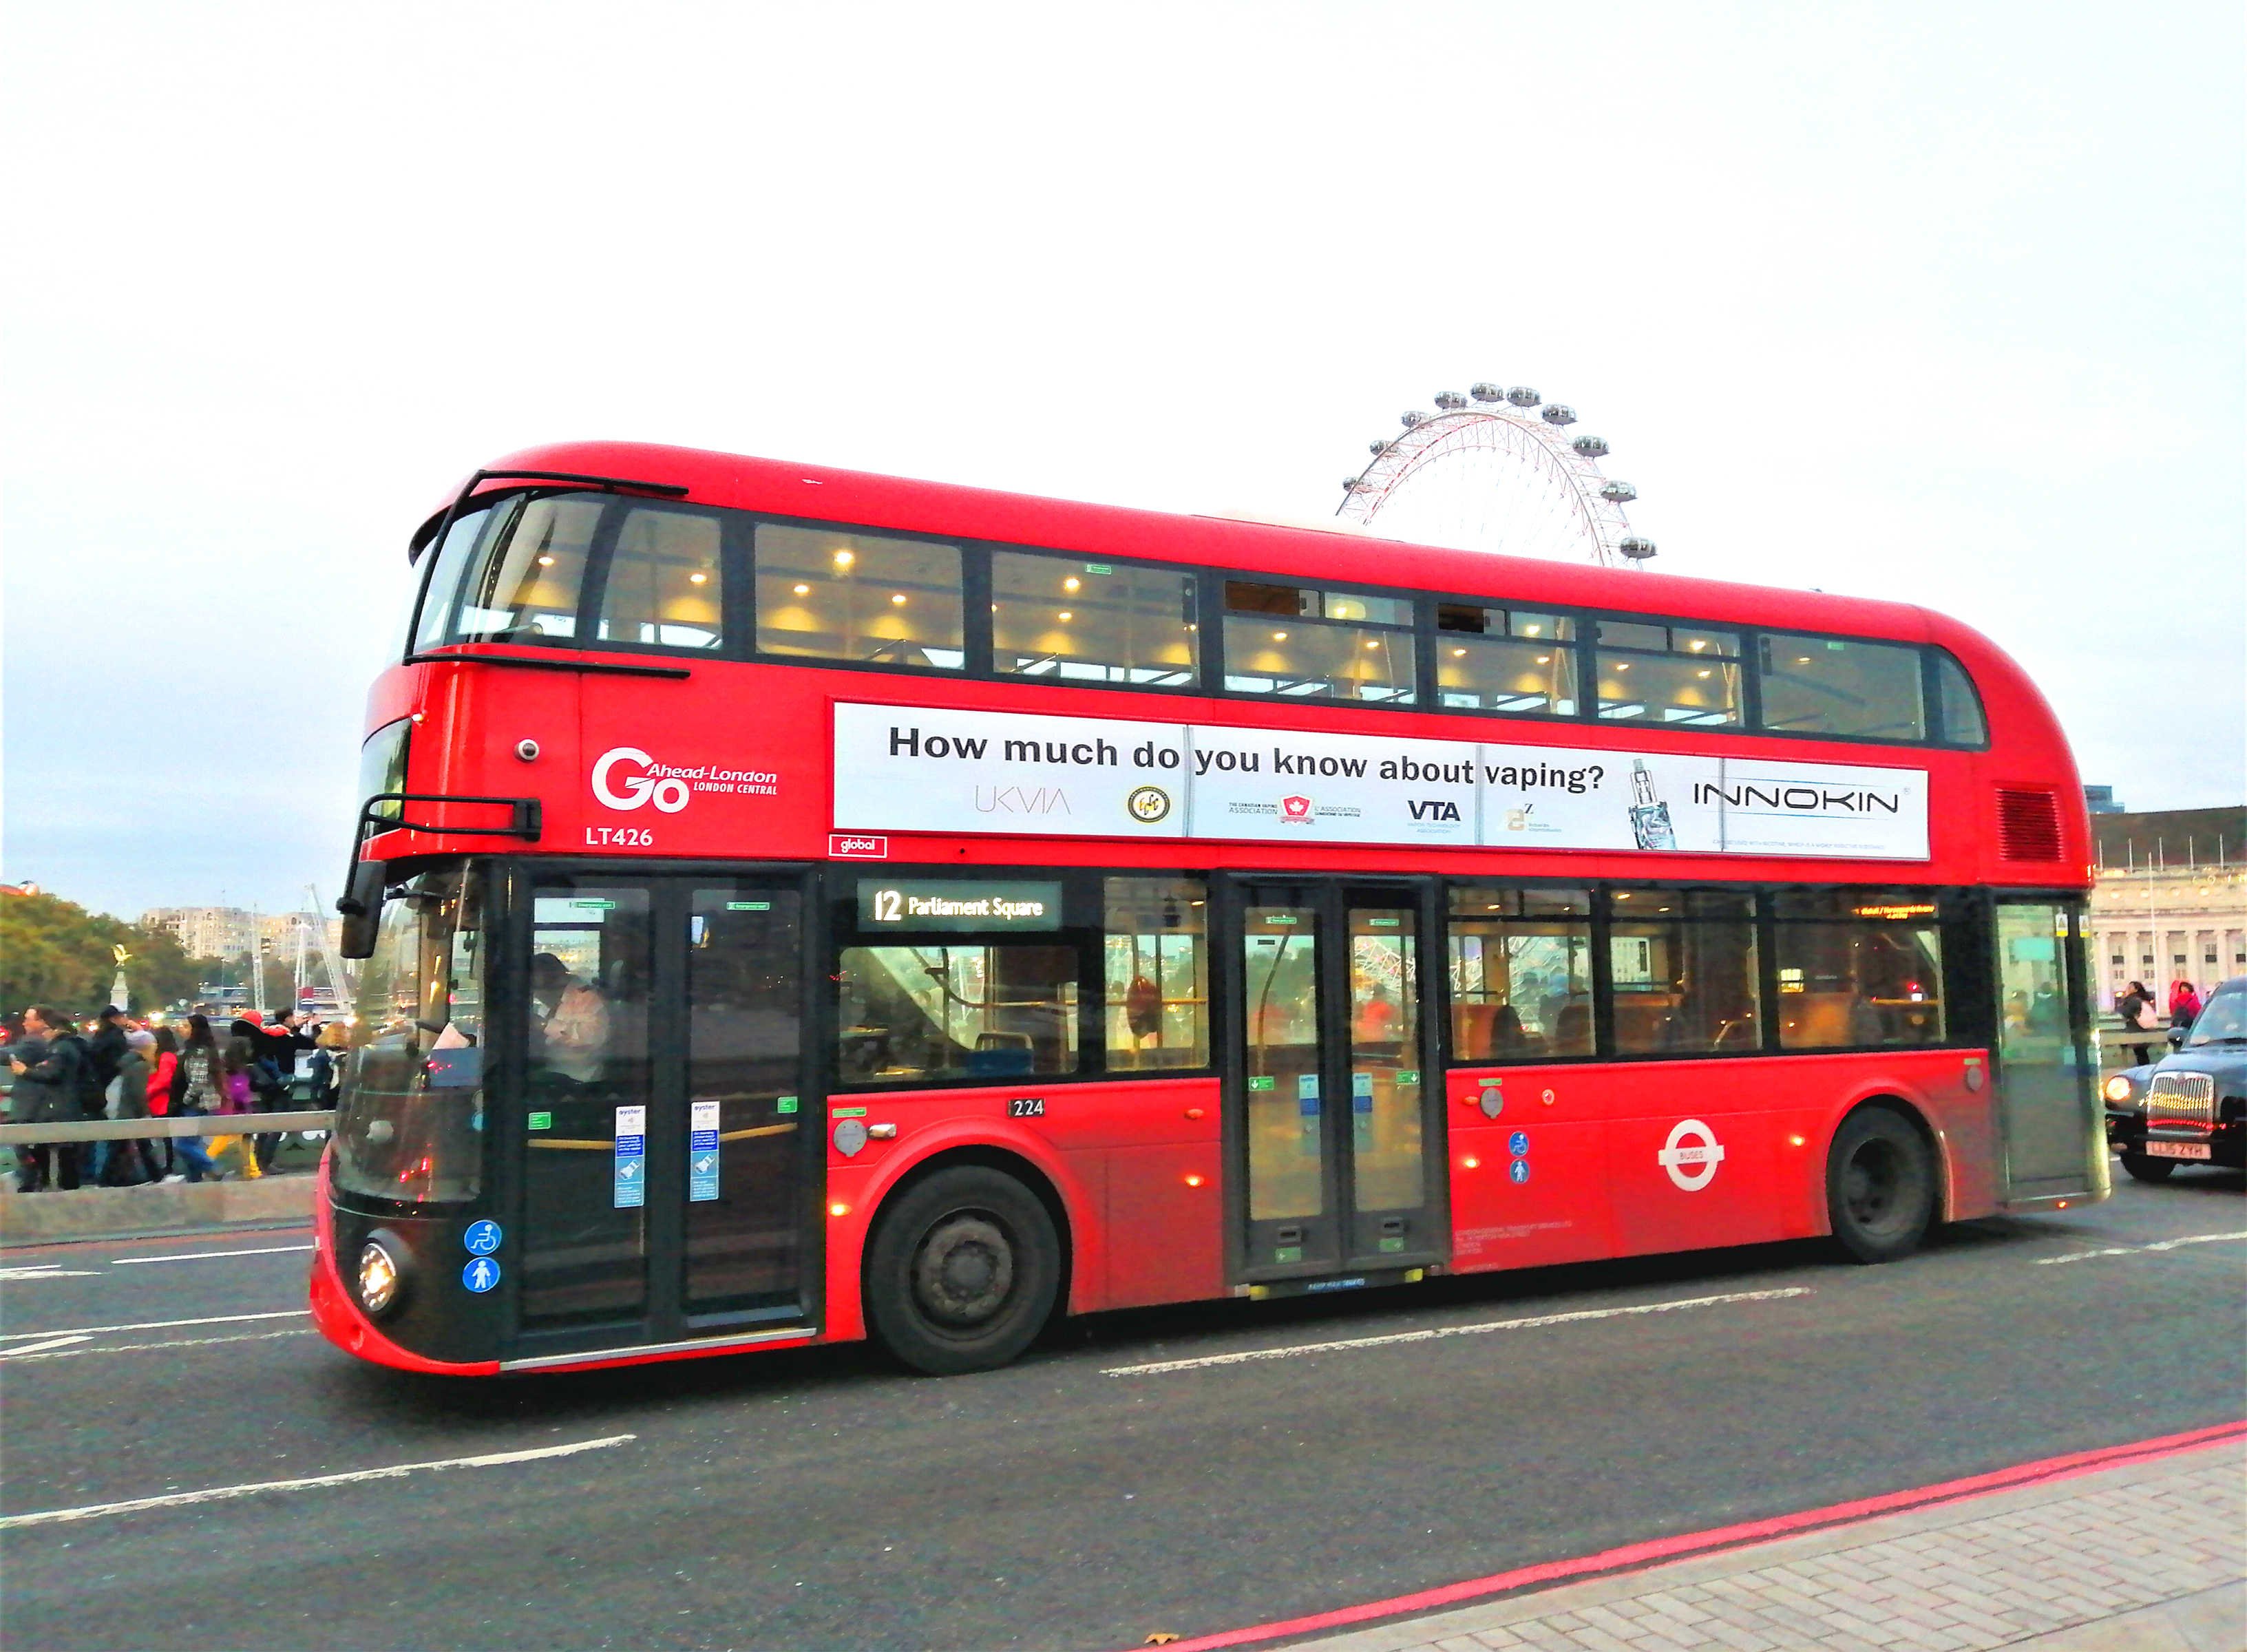 Innokin Bus Advocary Campaign in UK